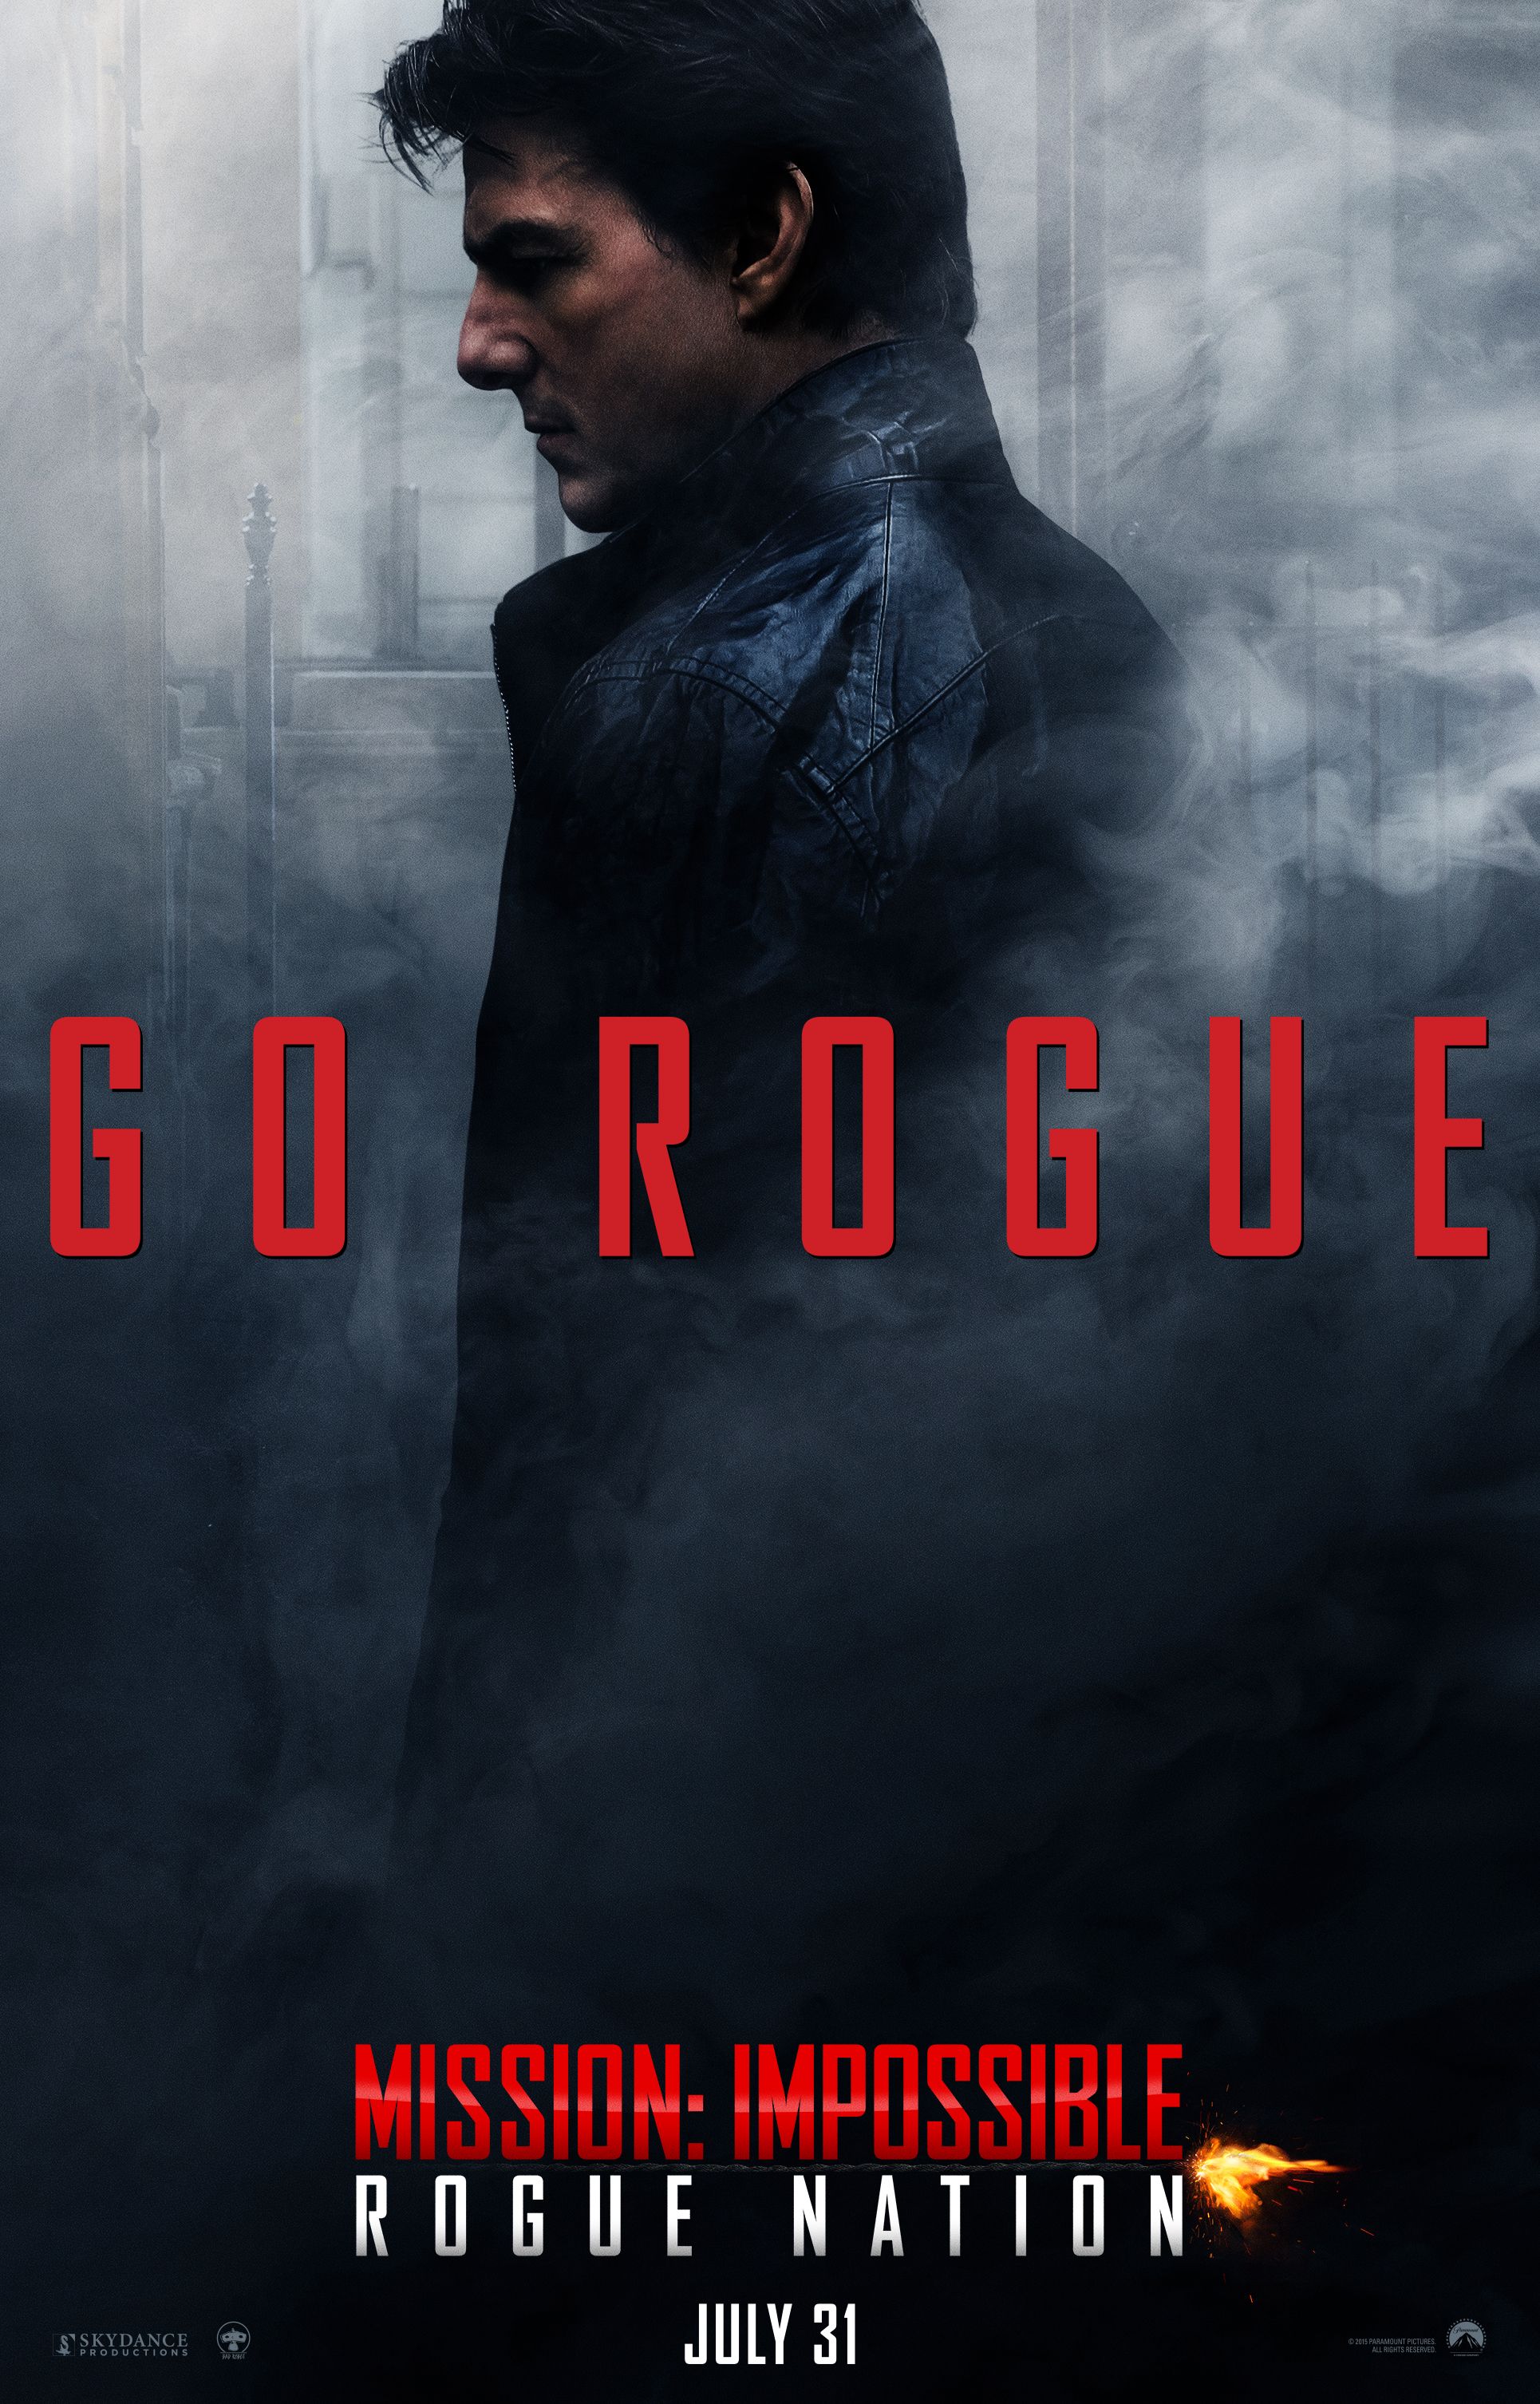 Mission: Impossible 5 Posters Tease New and Familiar Faces | Collider1930 x 3012